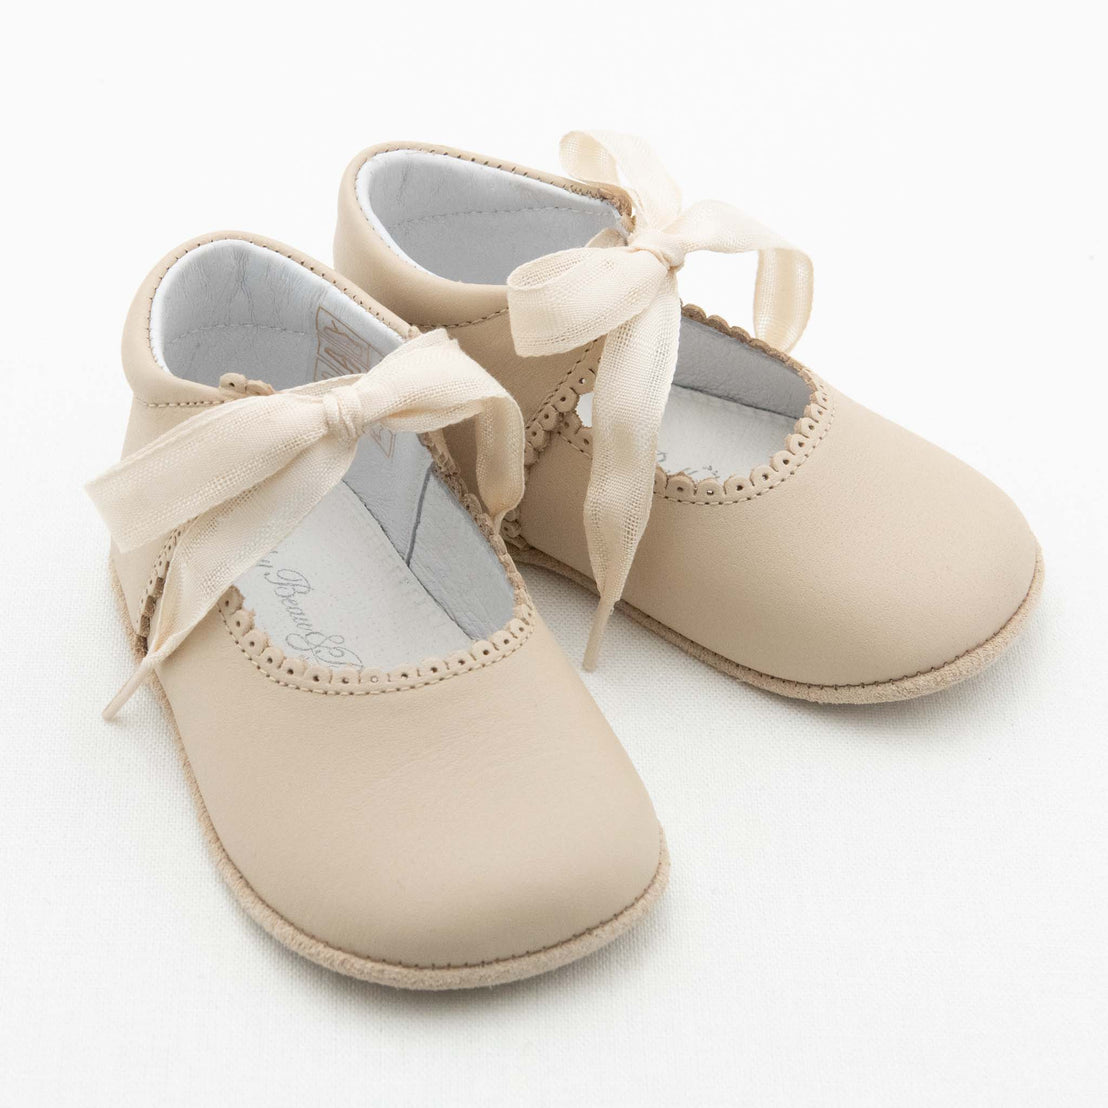 A pair of Tan Tie Mary Janes baby shoes with scalloped edges and a soft white interior. These Baby Beau & Belle shoes feature ivory satin ribbon ties and are displayed on a white surface.